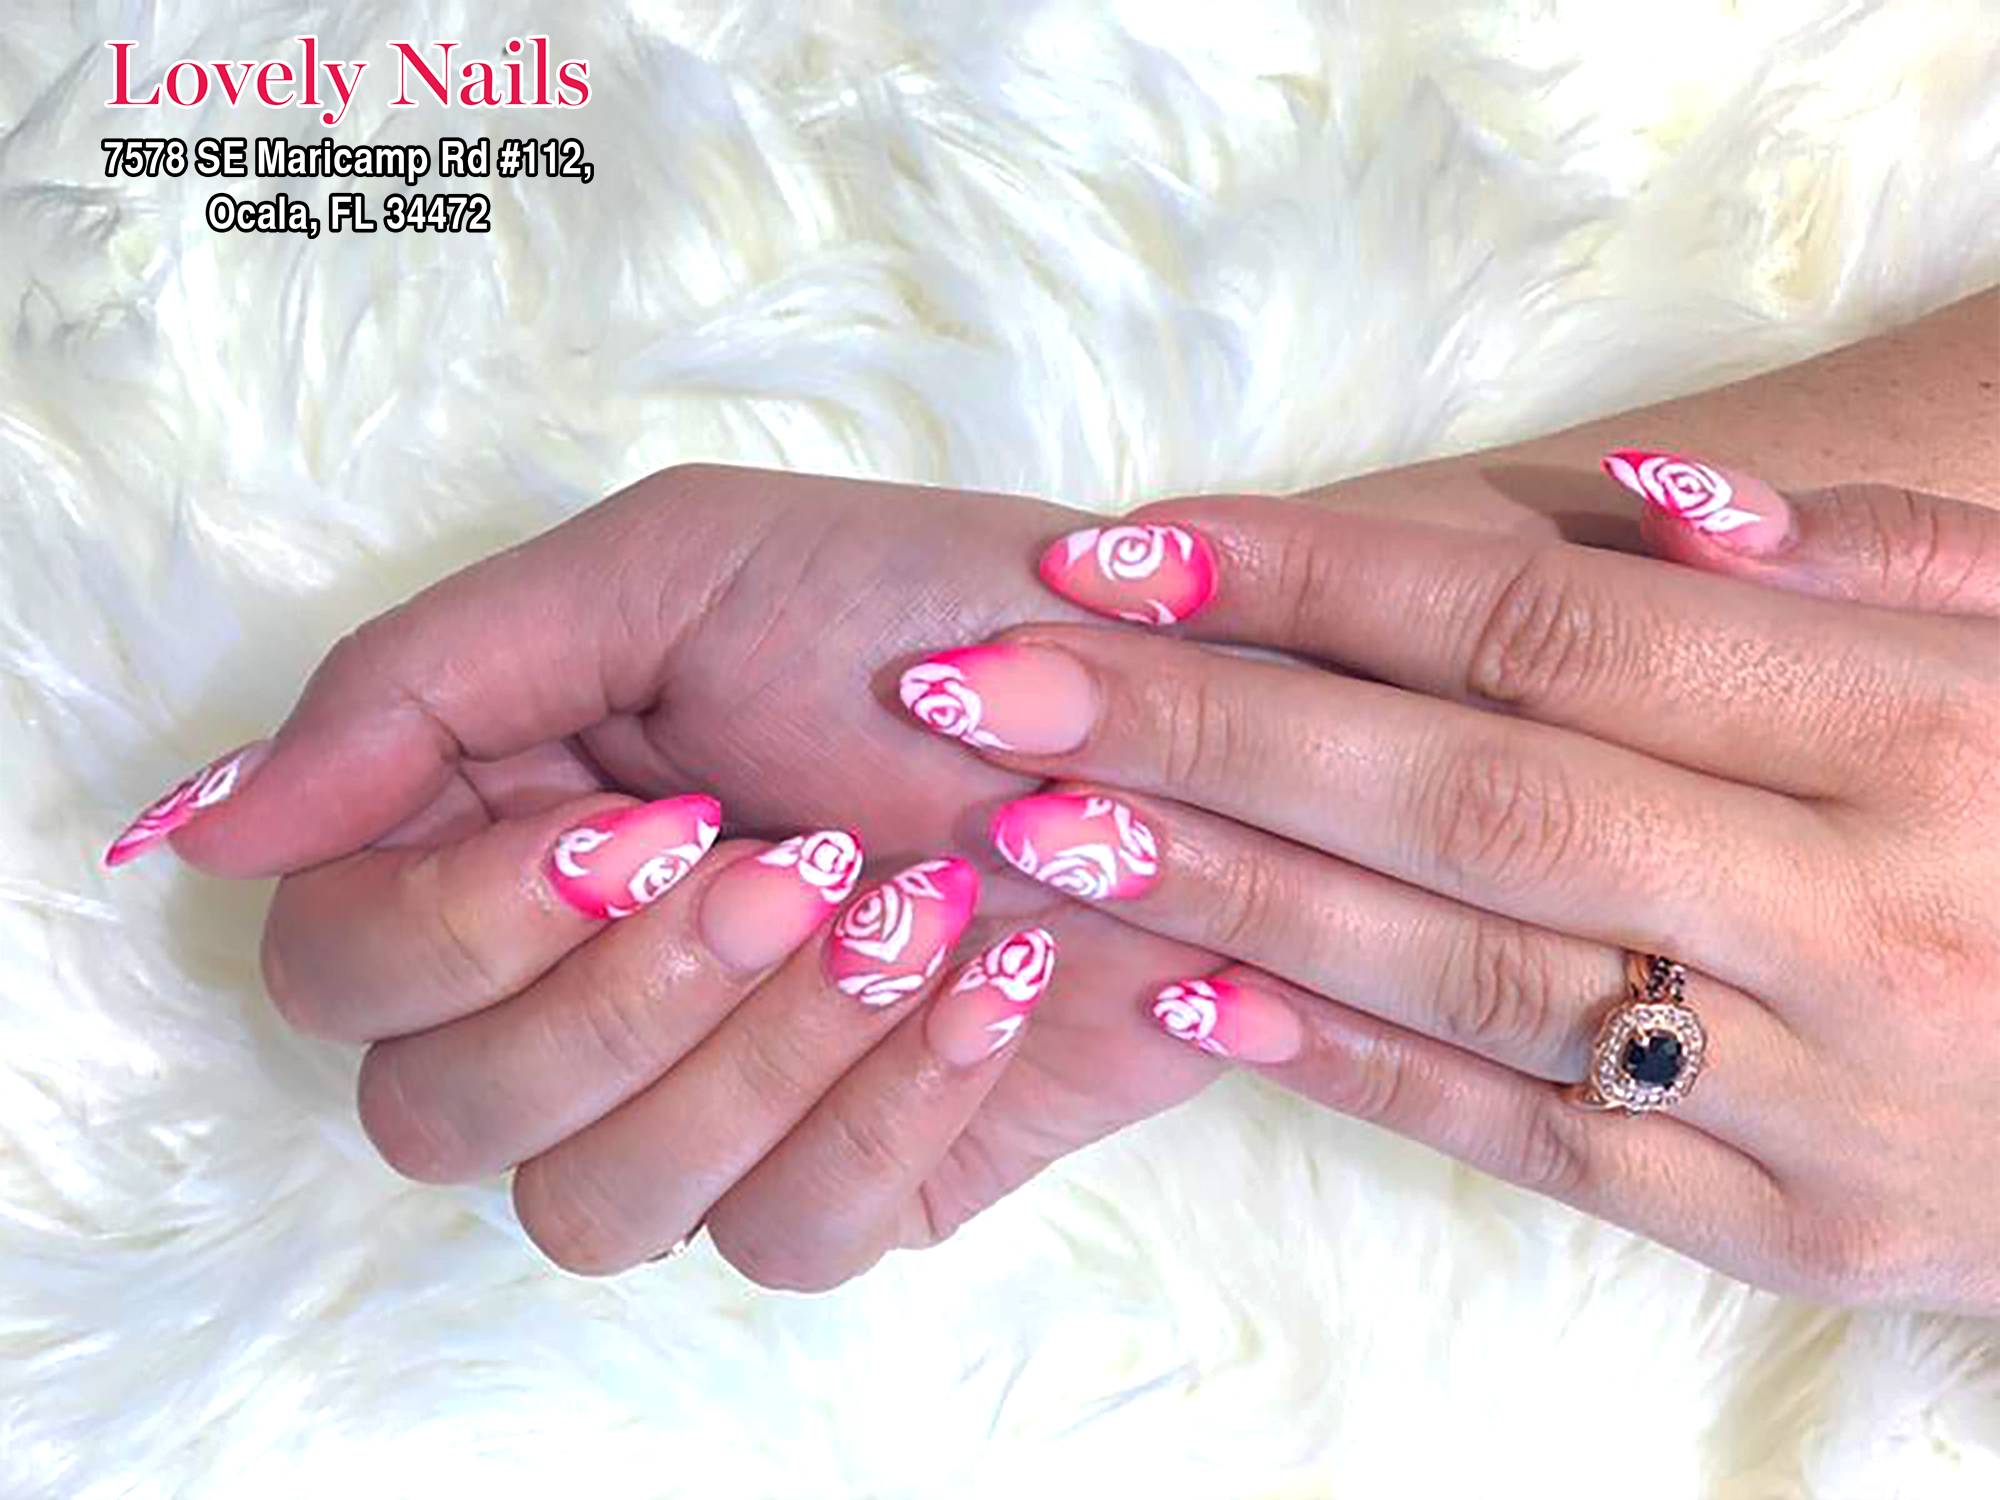 Lovely Nails | We can’t change the world but we can change your nails. Walk in today!